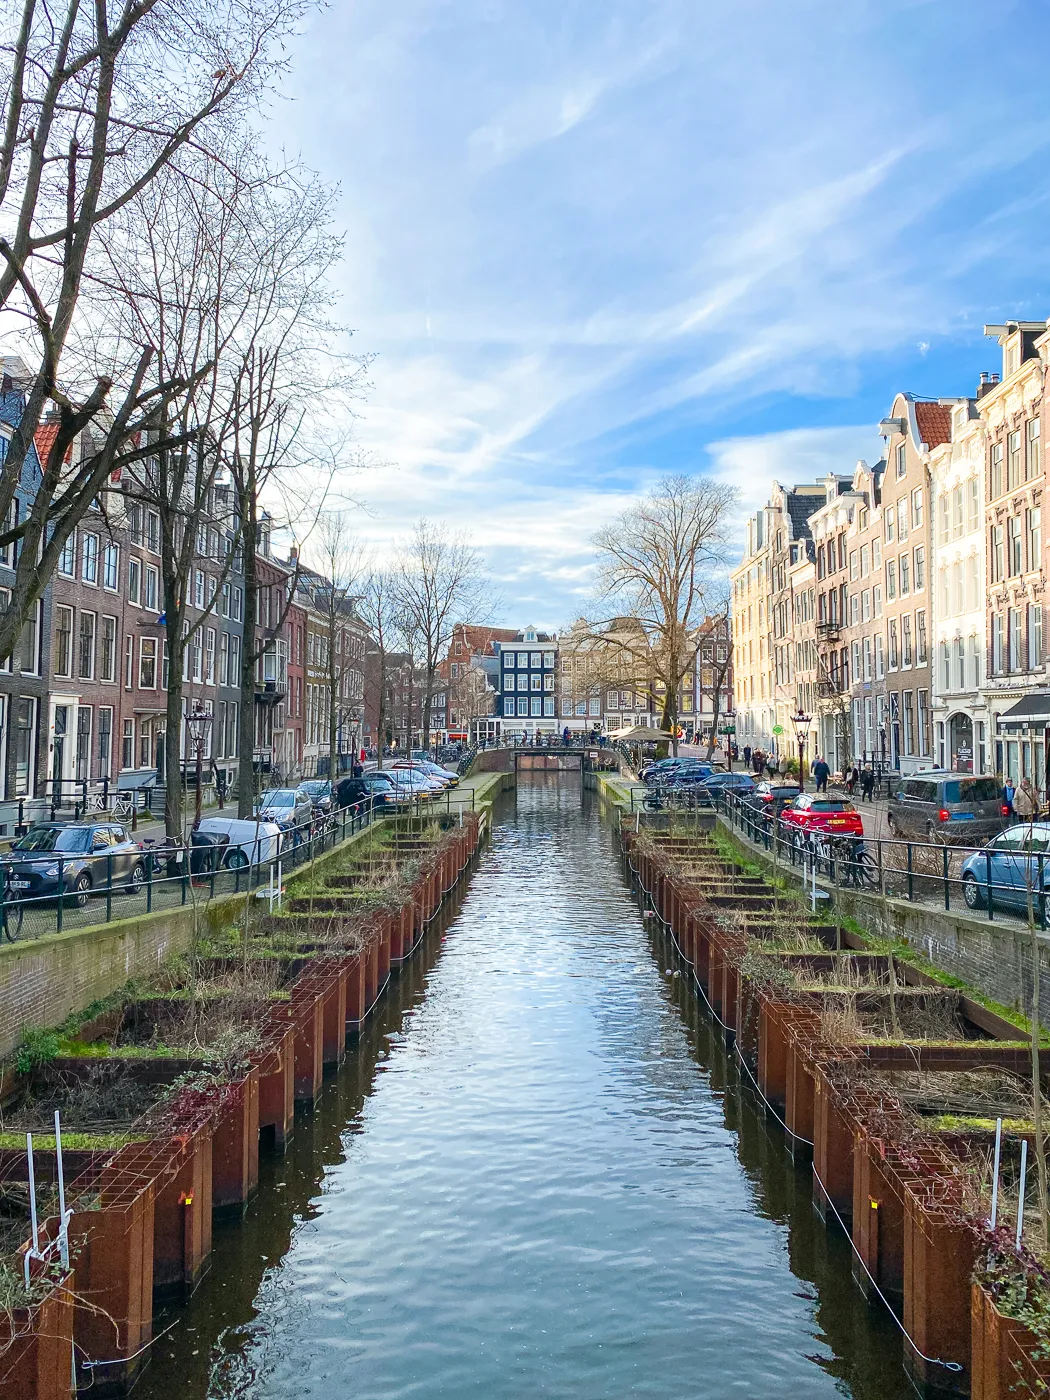 3 day amsterdam itinerary, best things to do in amsterdam, jordaan canal houses